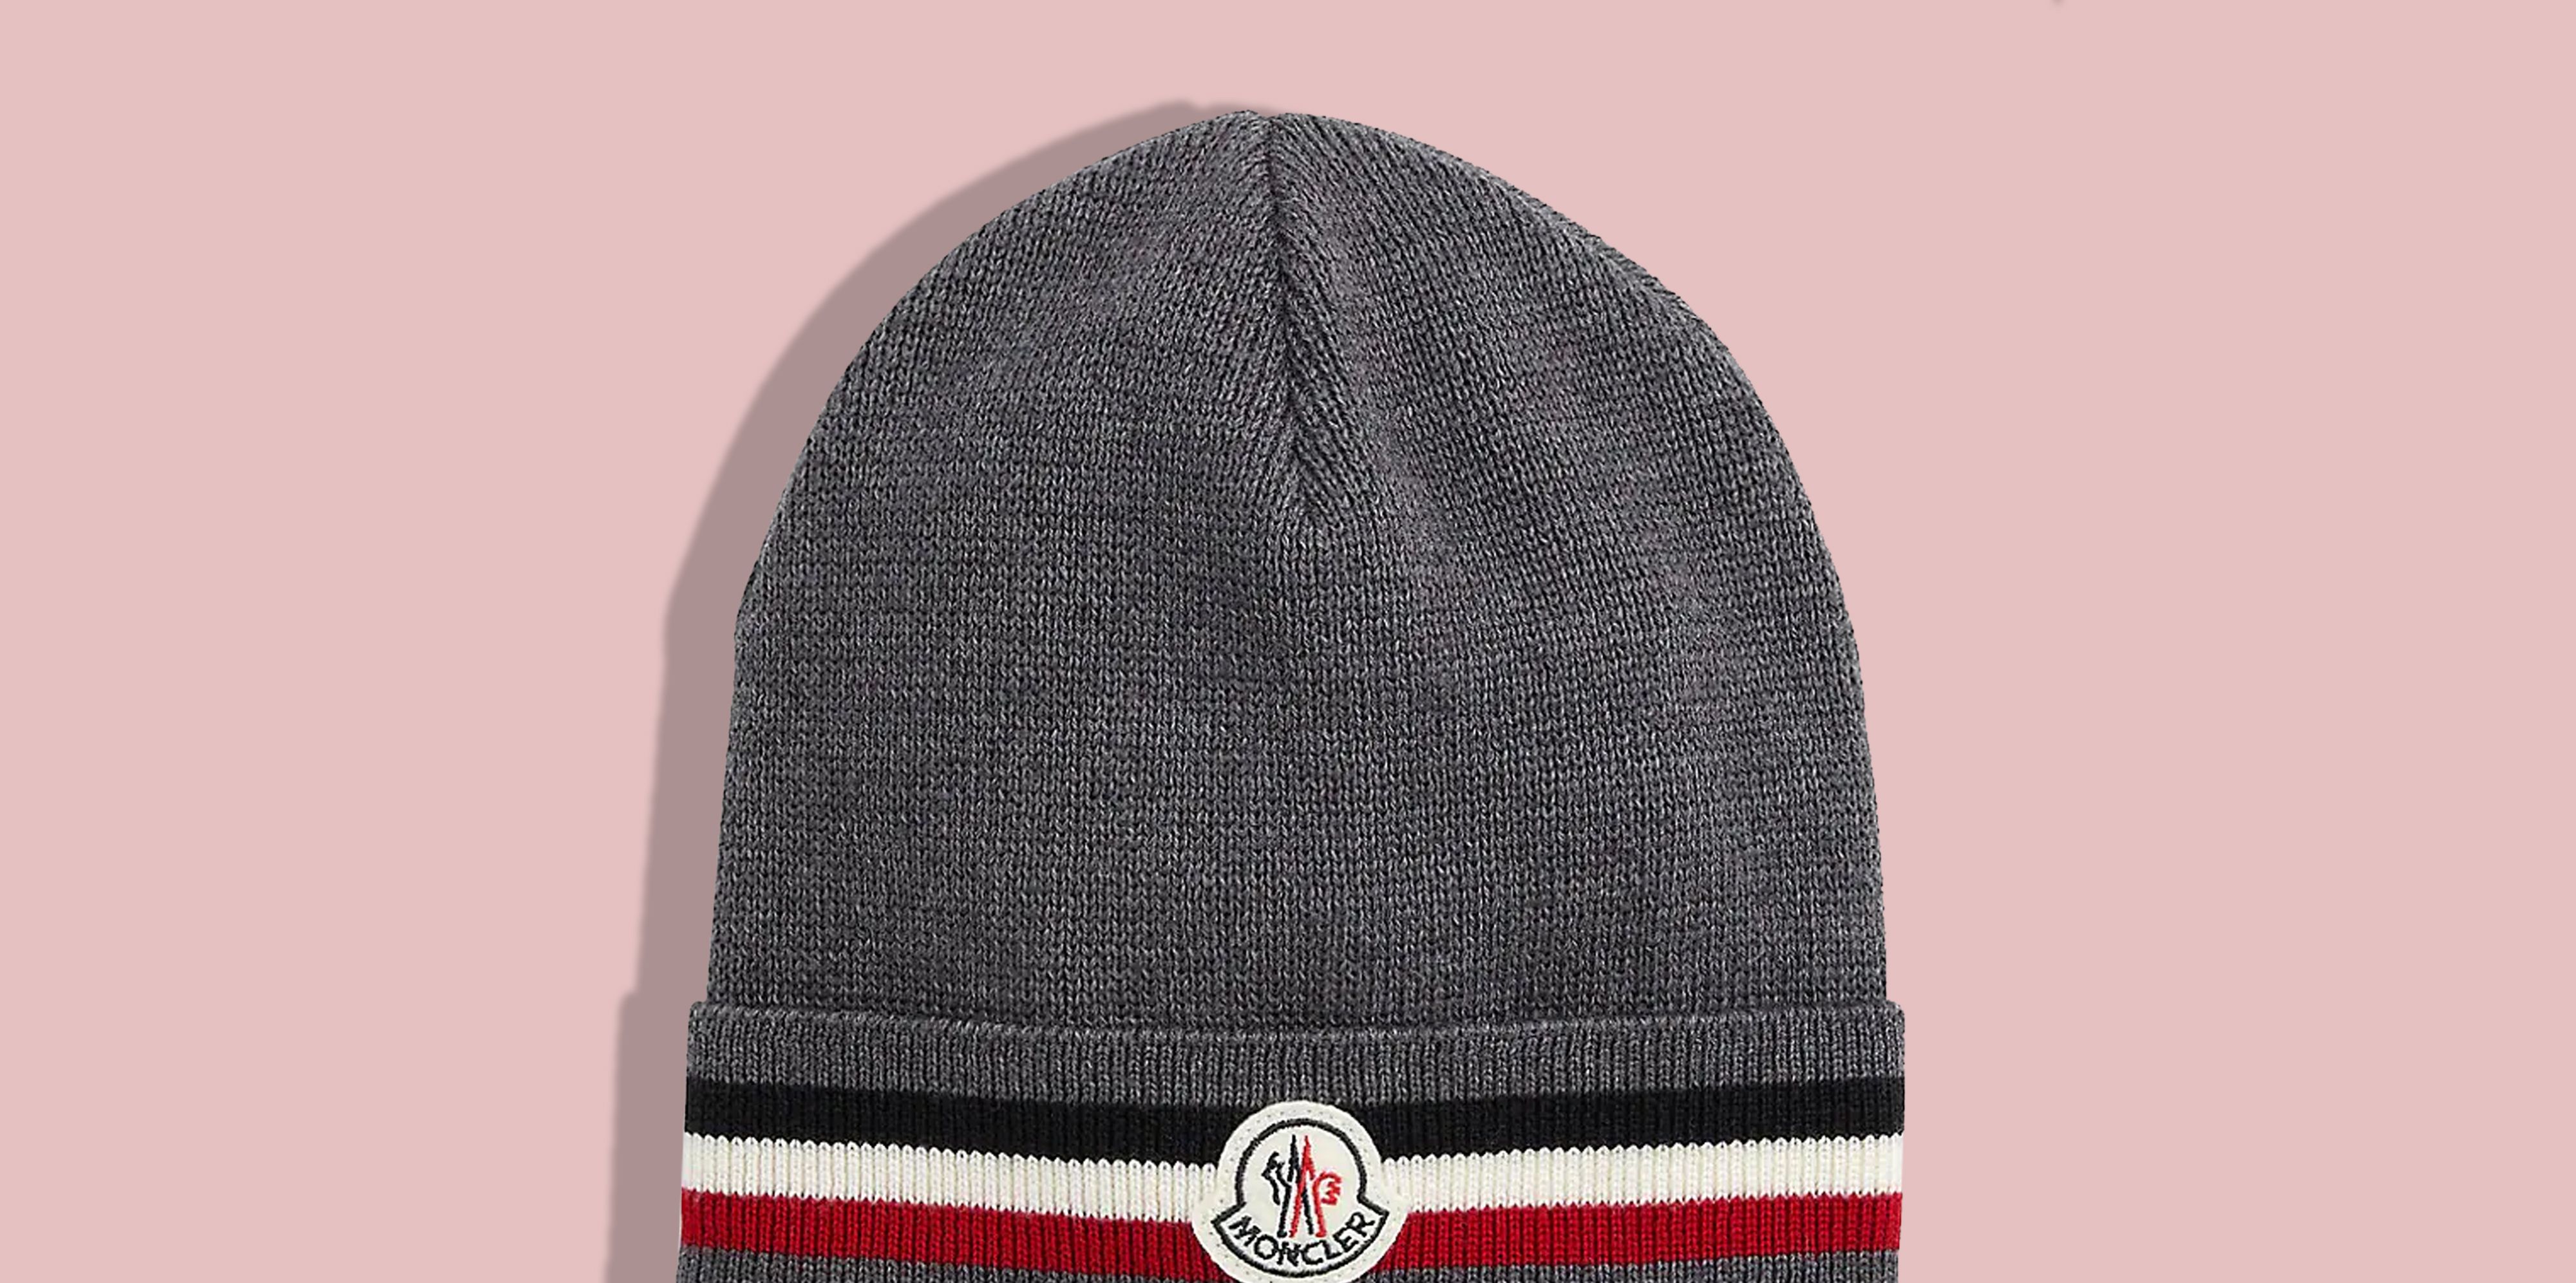 Our Top 10 Best Available Beanies in Store at Sneaker Summit